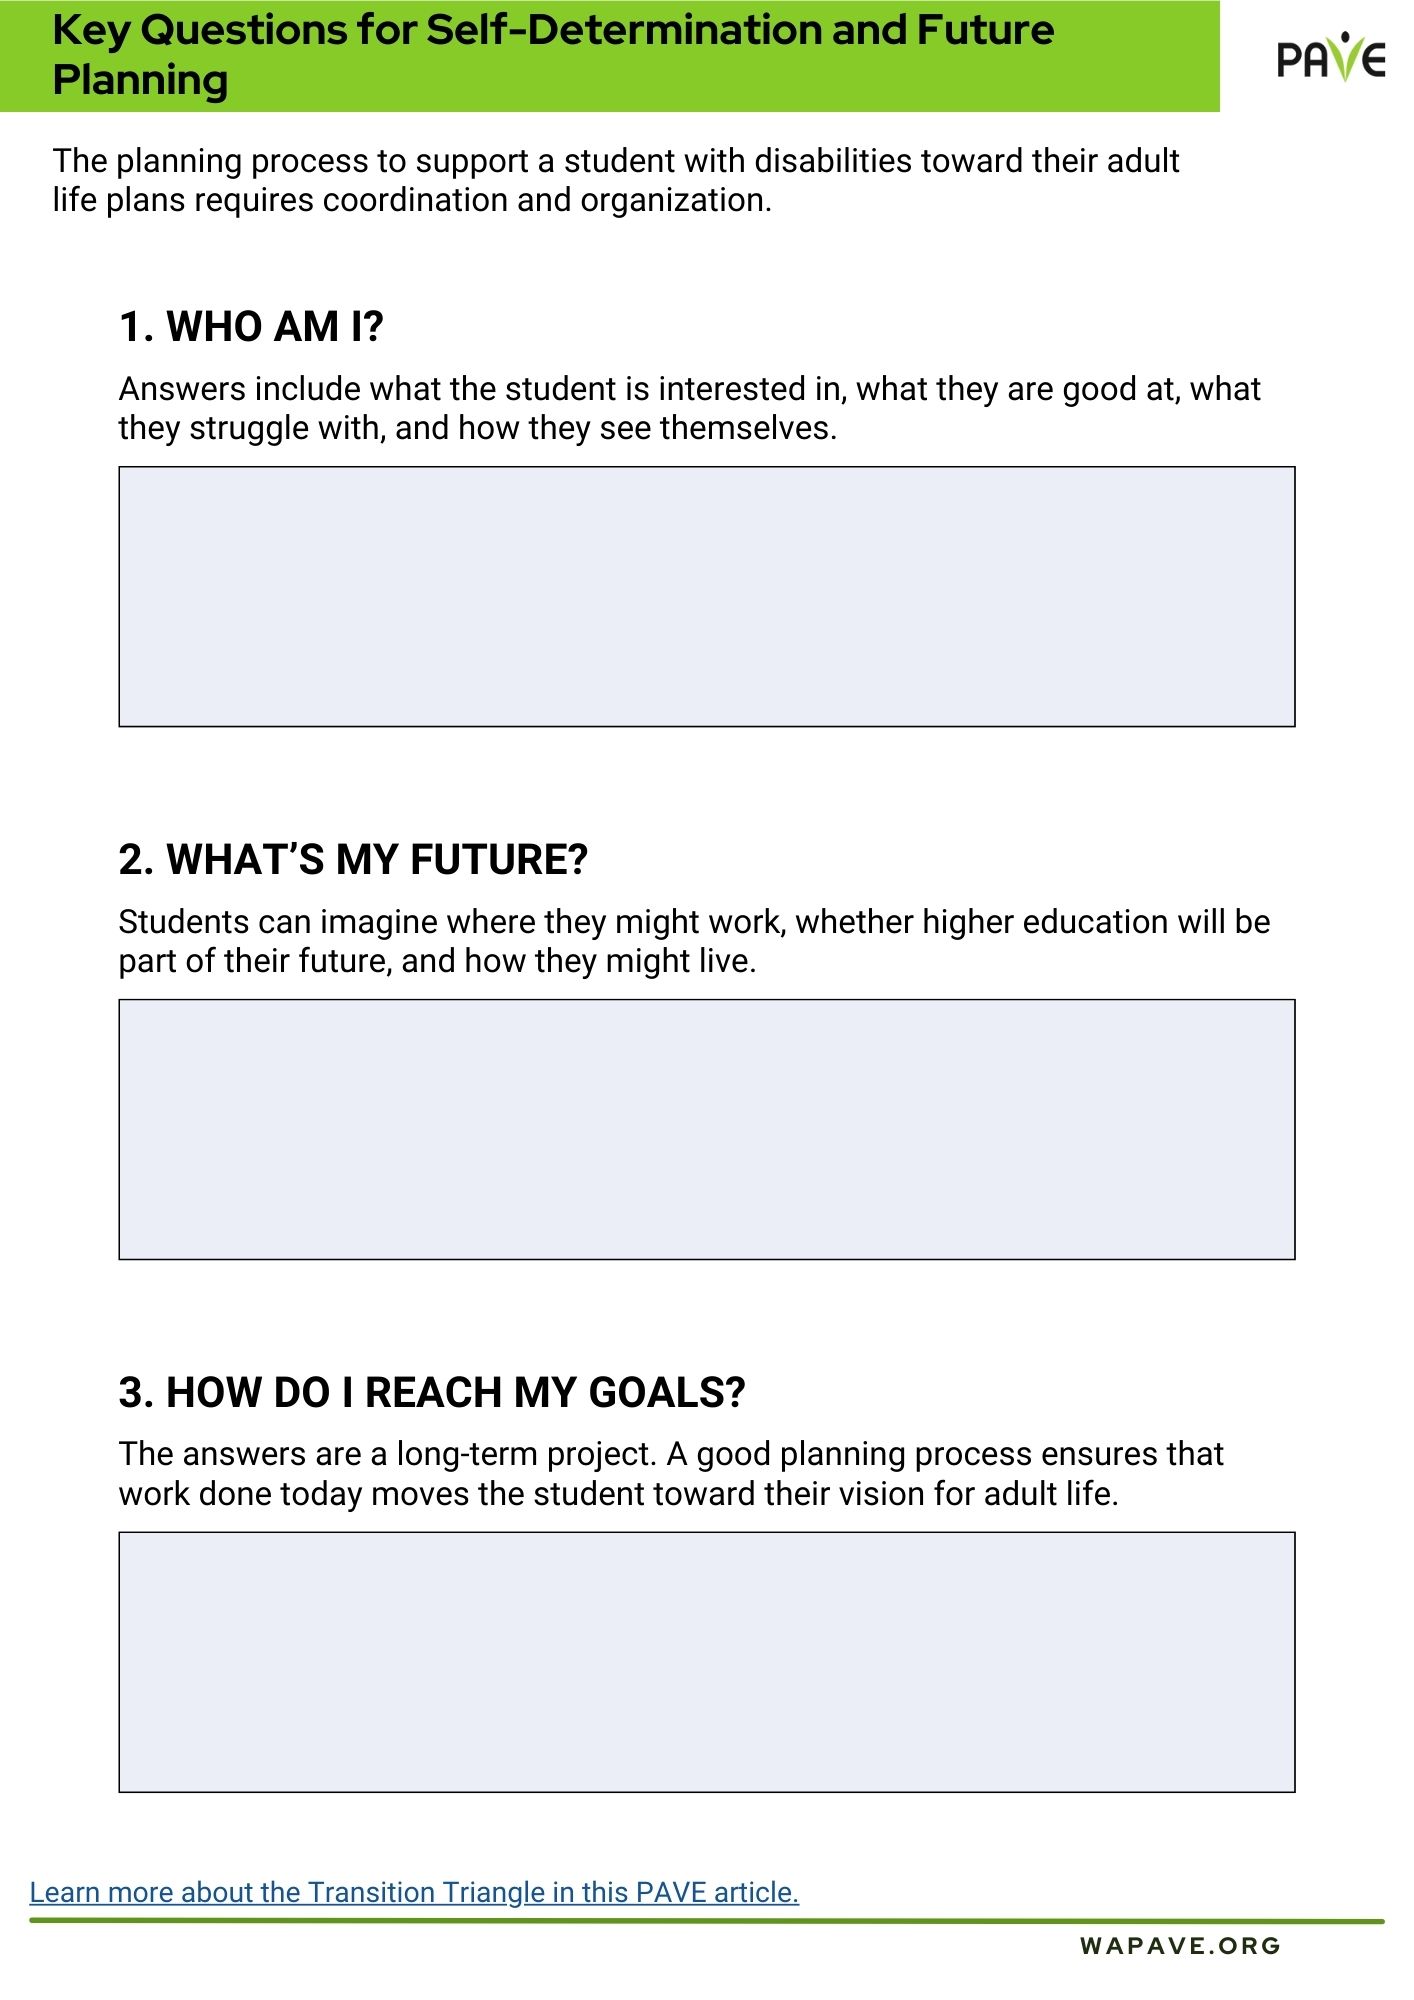 Key Questions for Self-Determination and Future Planning Fillable worksheet.